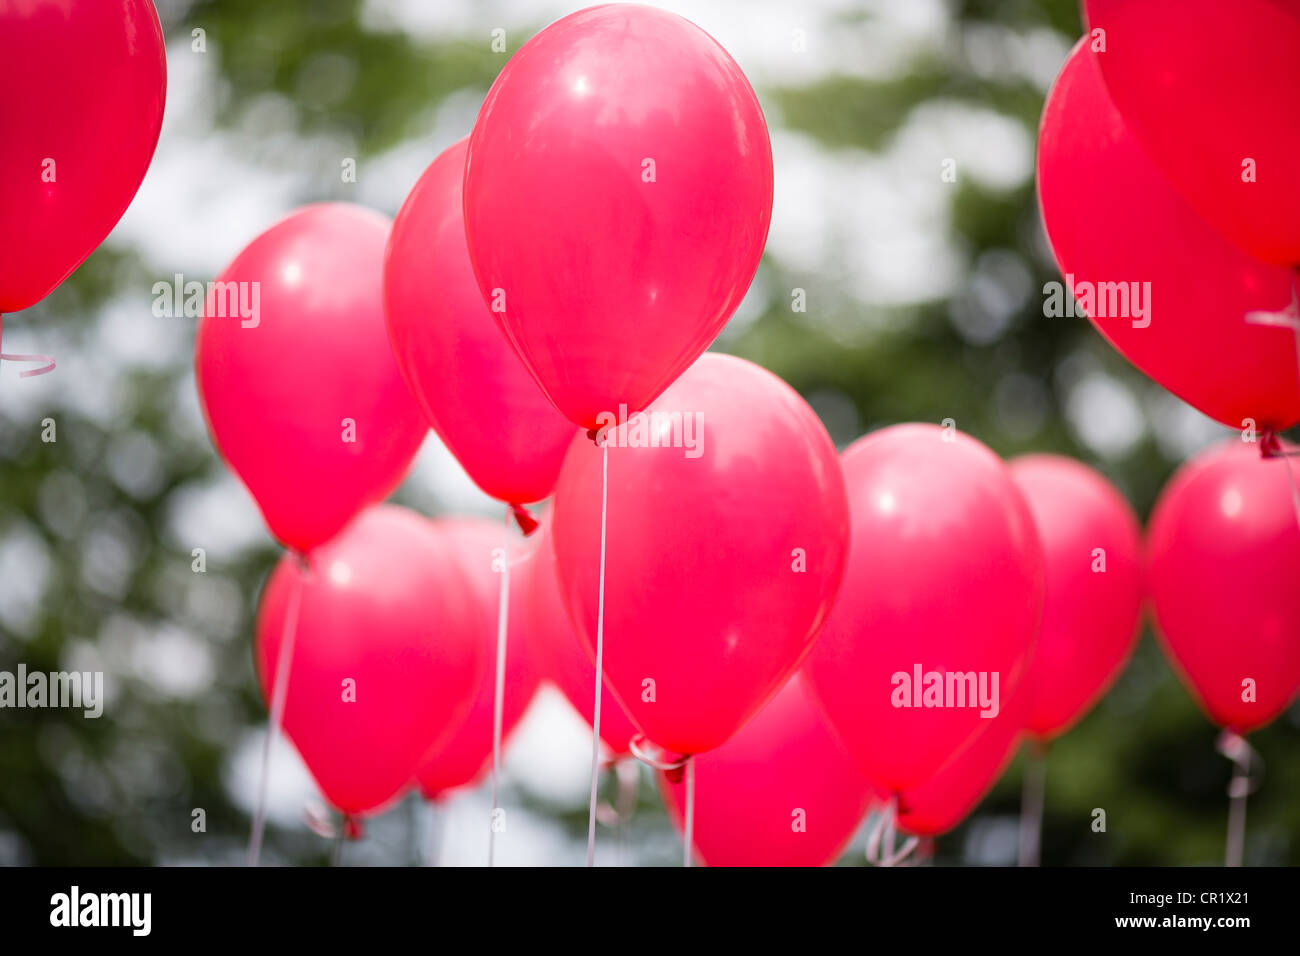 celebration concept with pink balloons on green foliage, selective focus Stock Photo